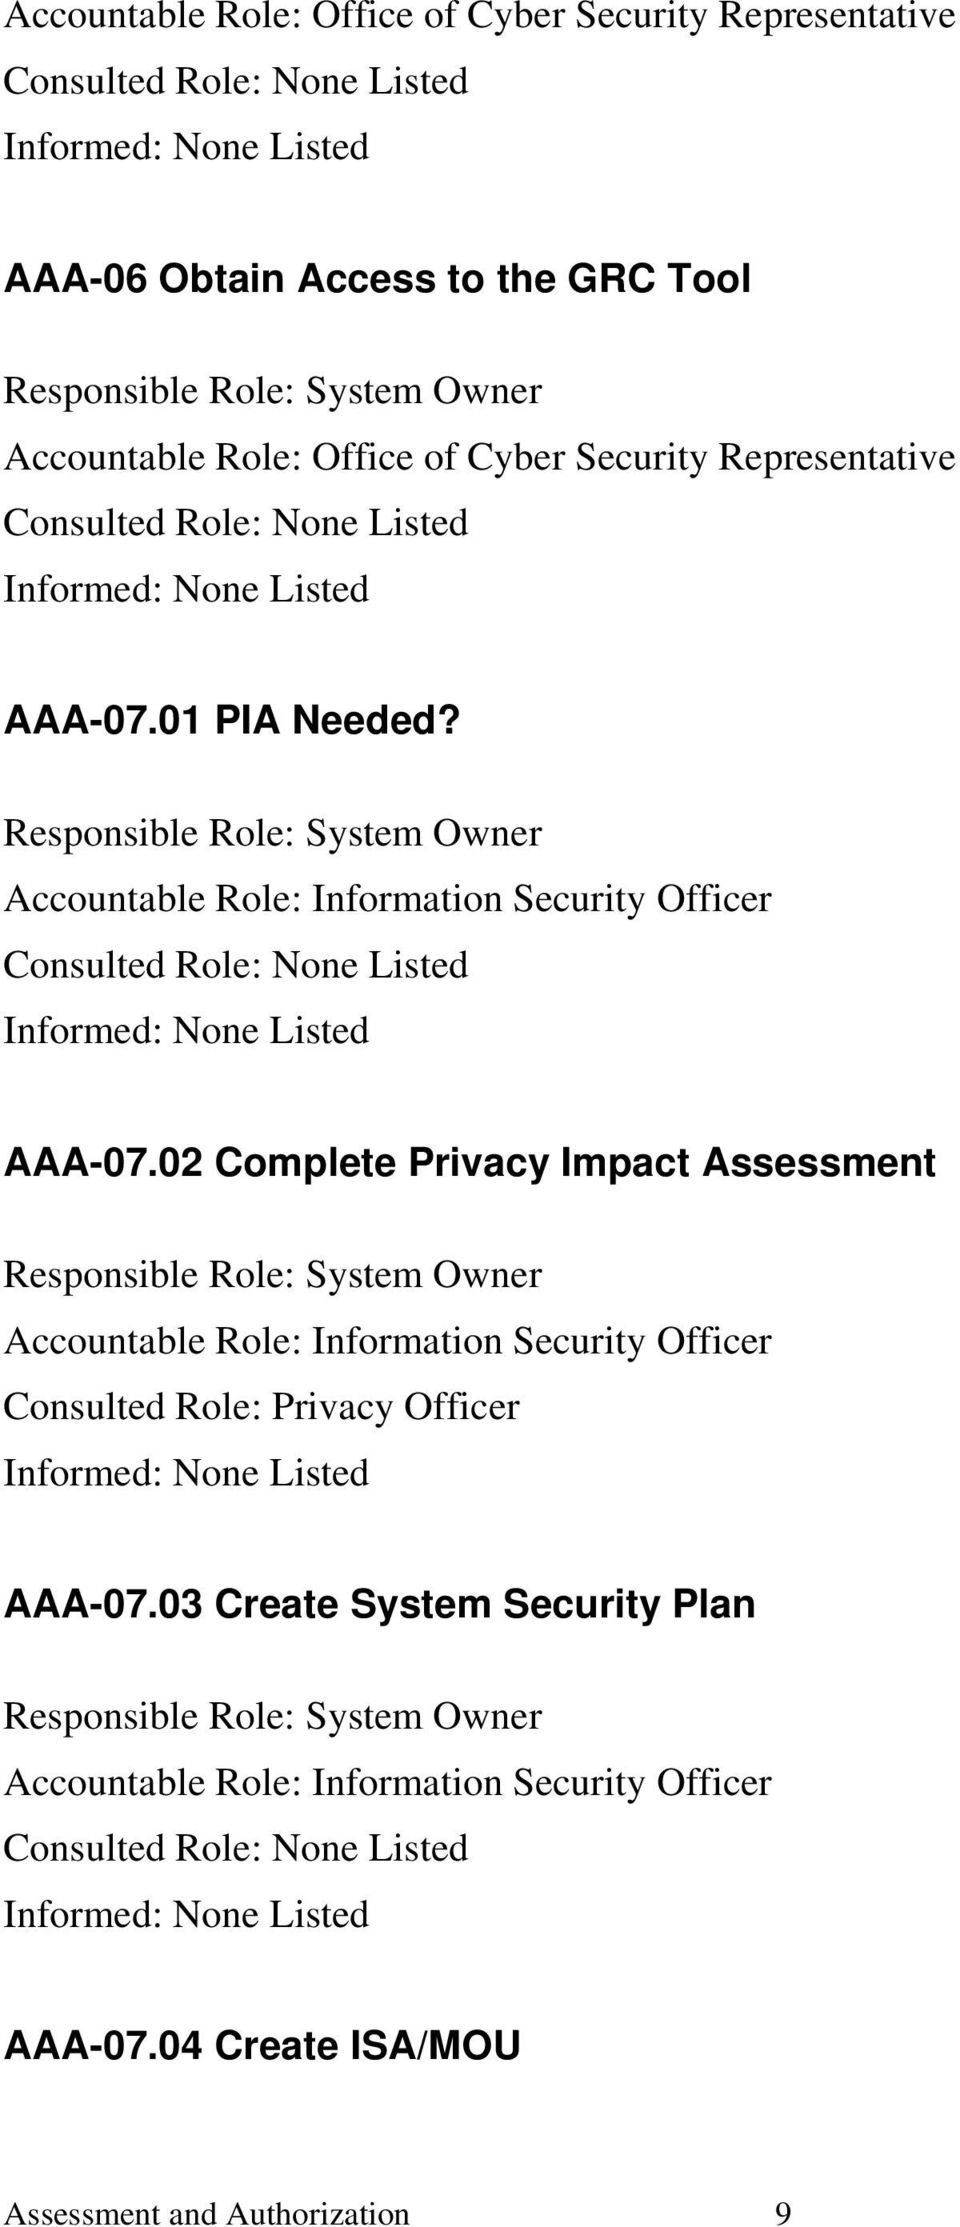 02 Complete Privacy Impact Assessment : System Owner : Information Security Officer : Privacy Officer Informed: AAA-07.